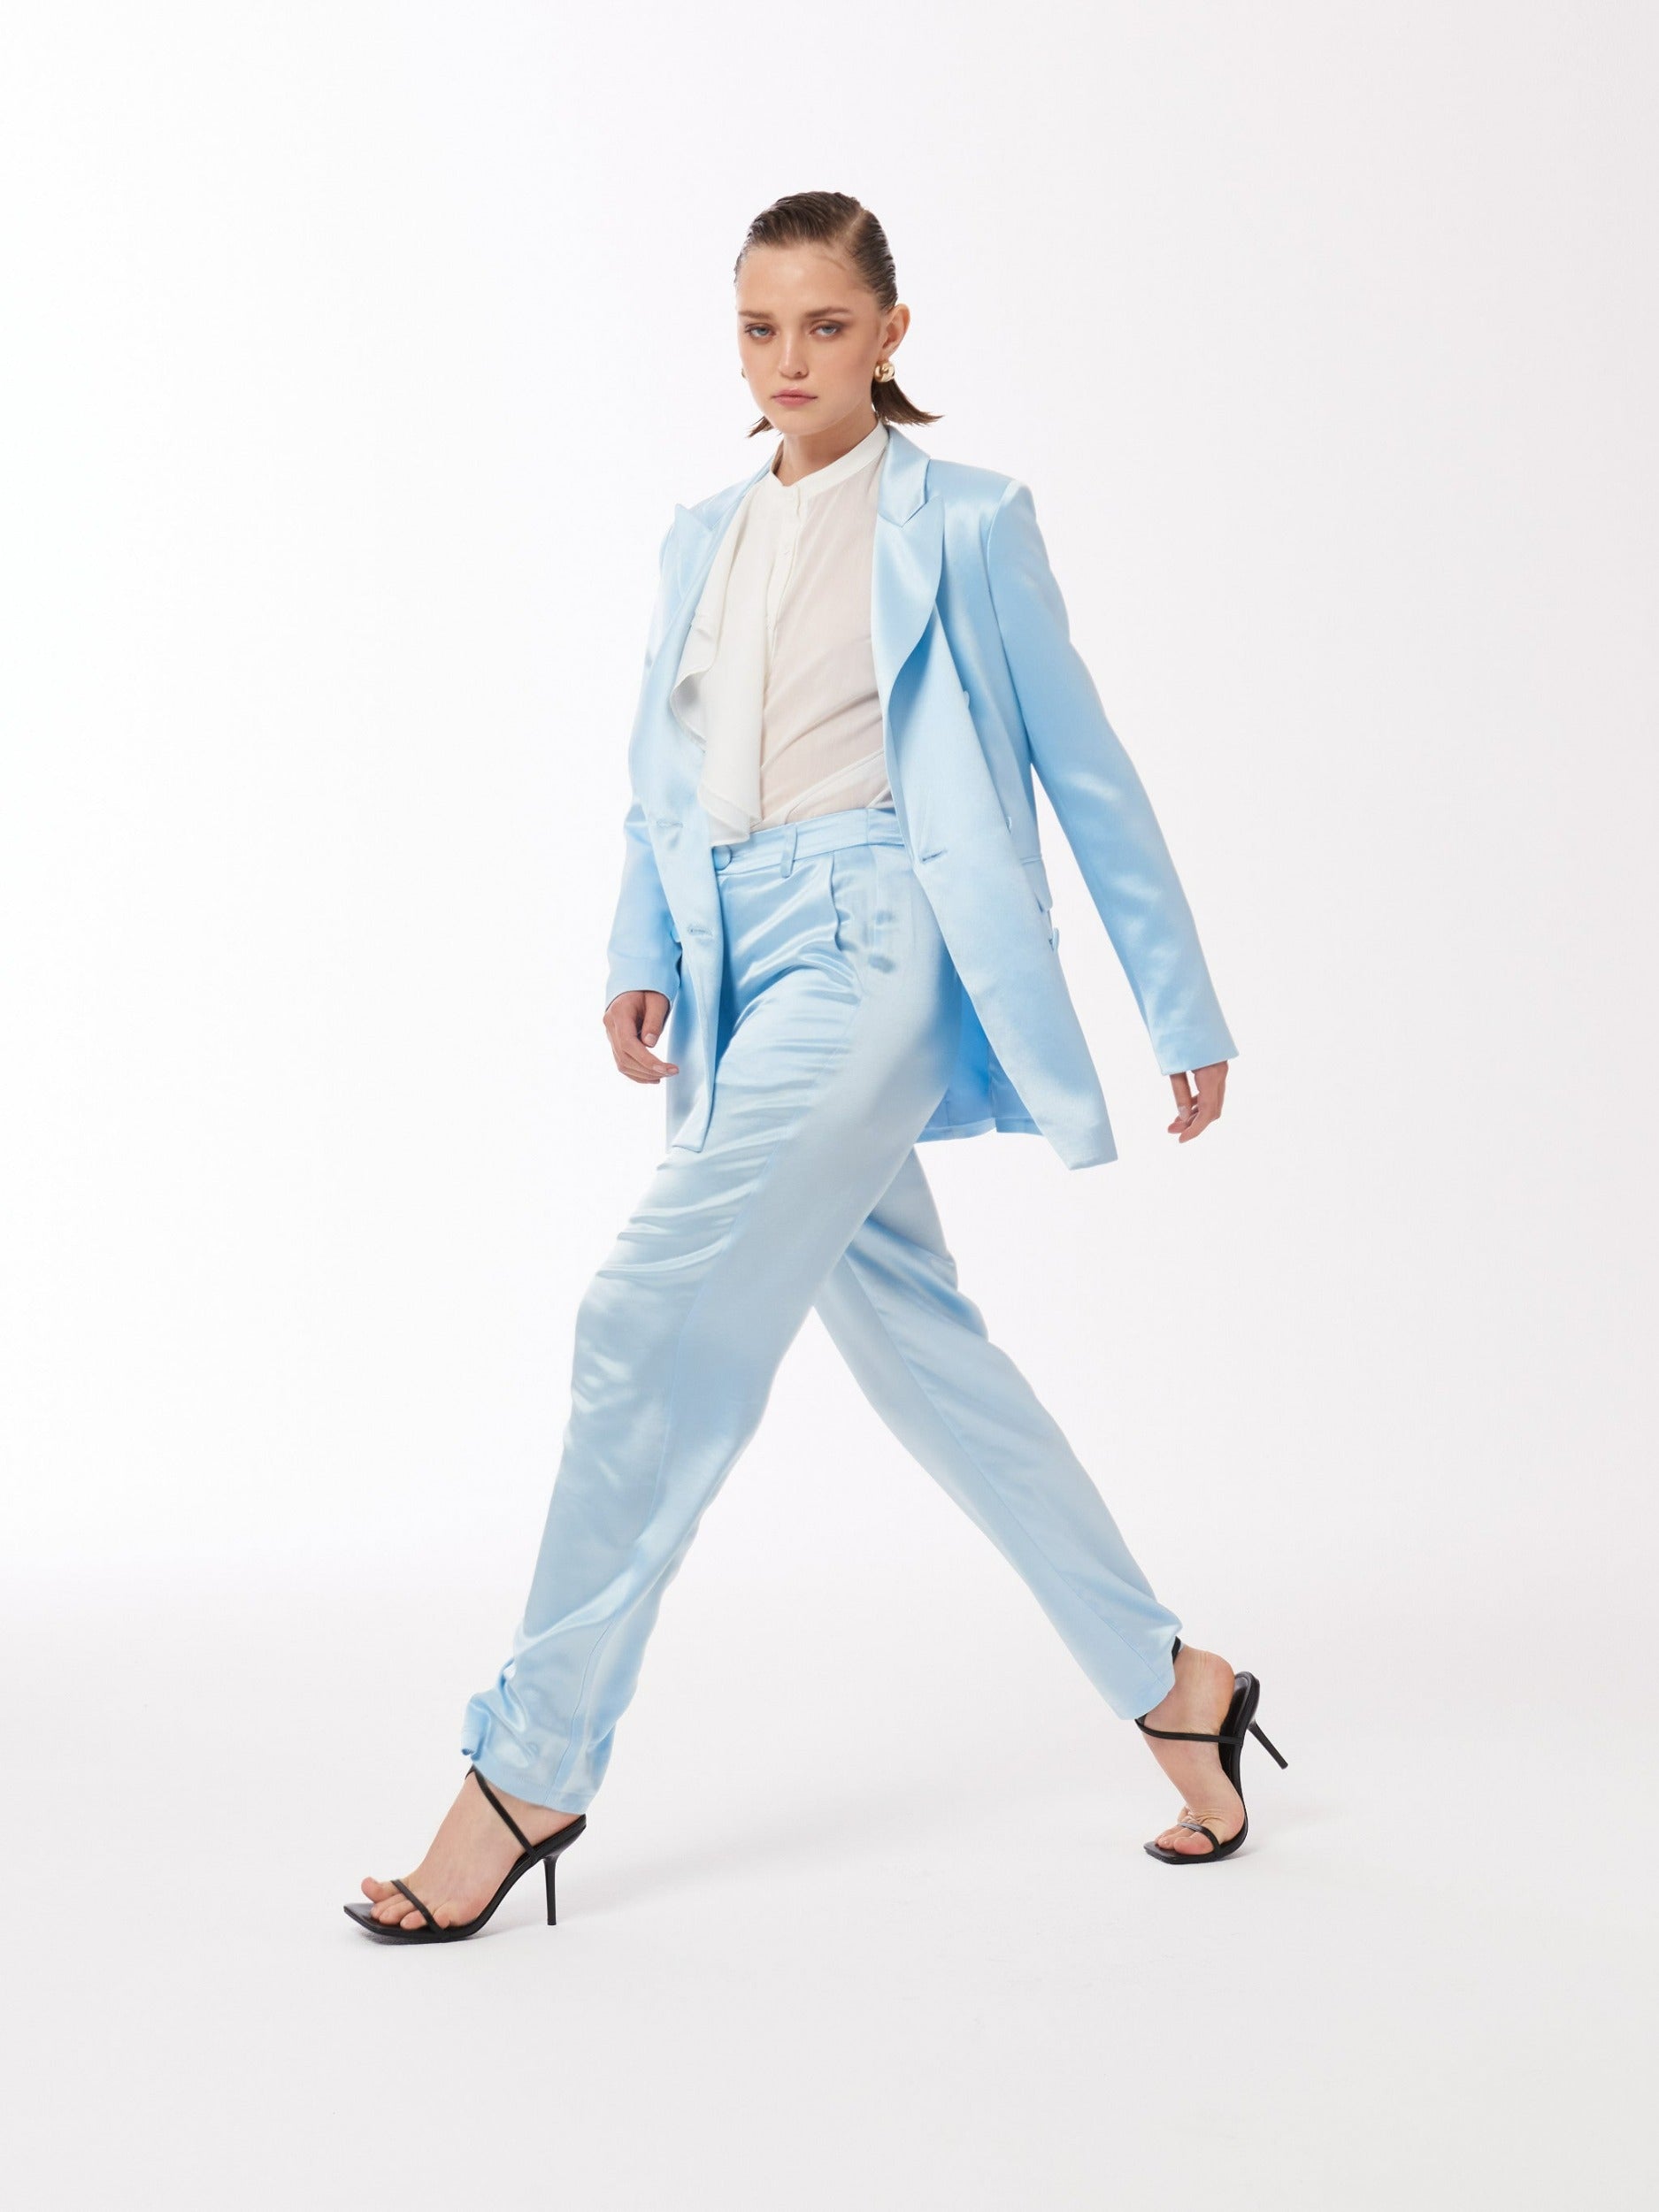 Satin Double-Breasted Blazer Jacket in Baby Blue